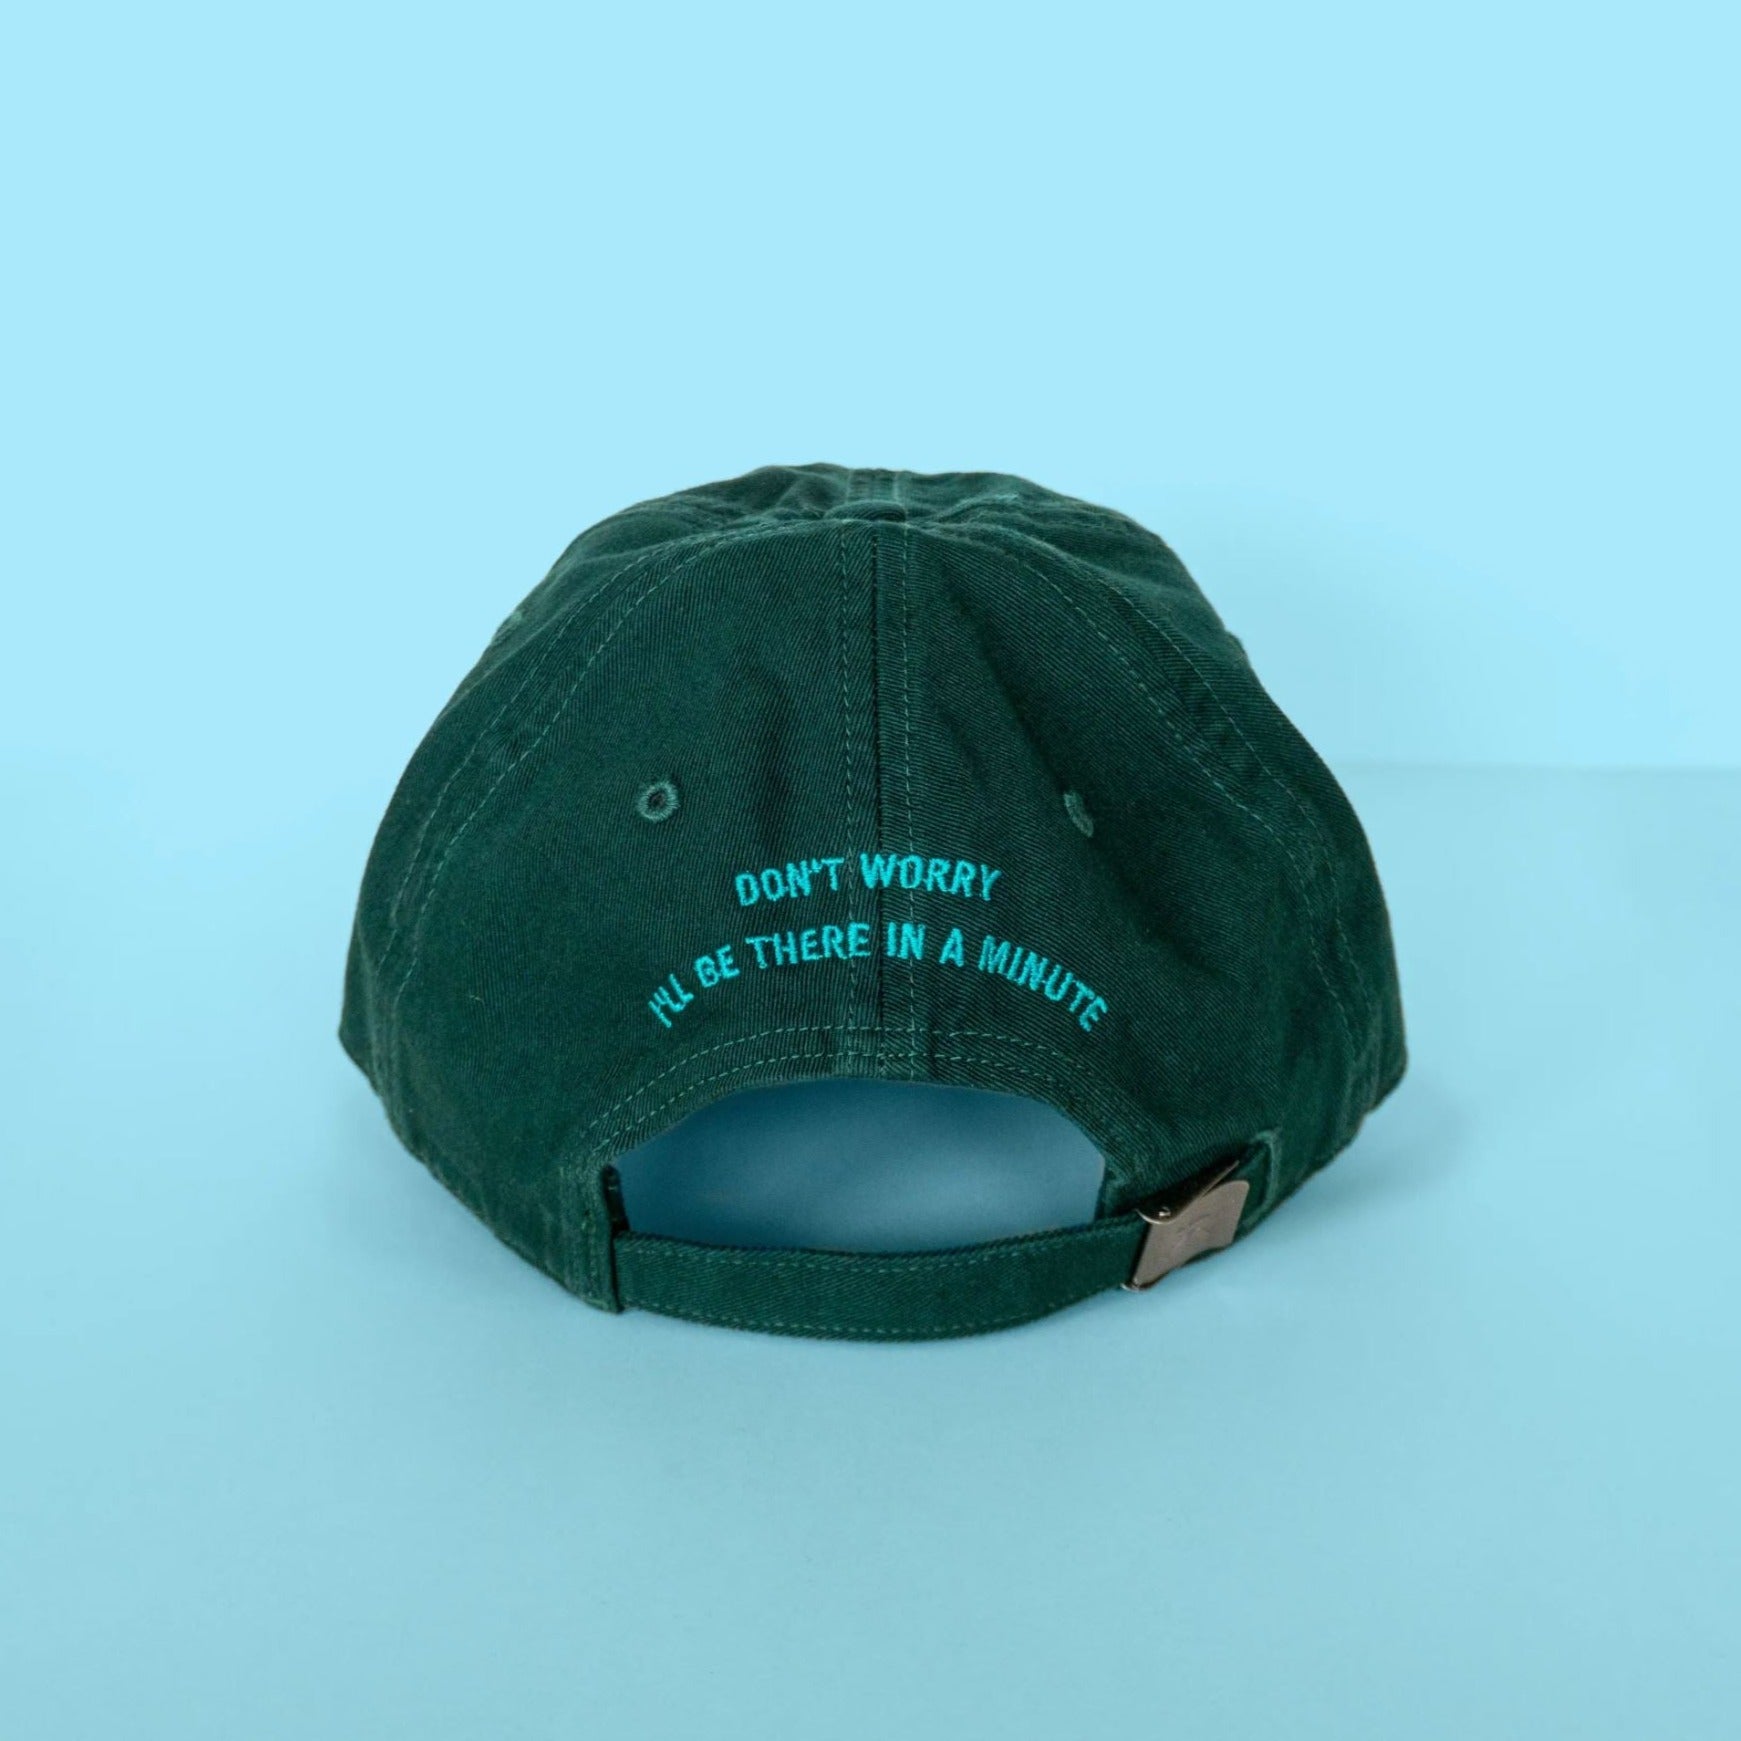 Out of Breath Hiking Society Embroidered Hat